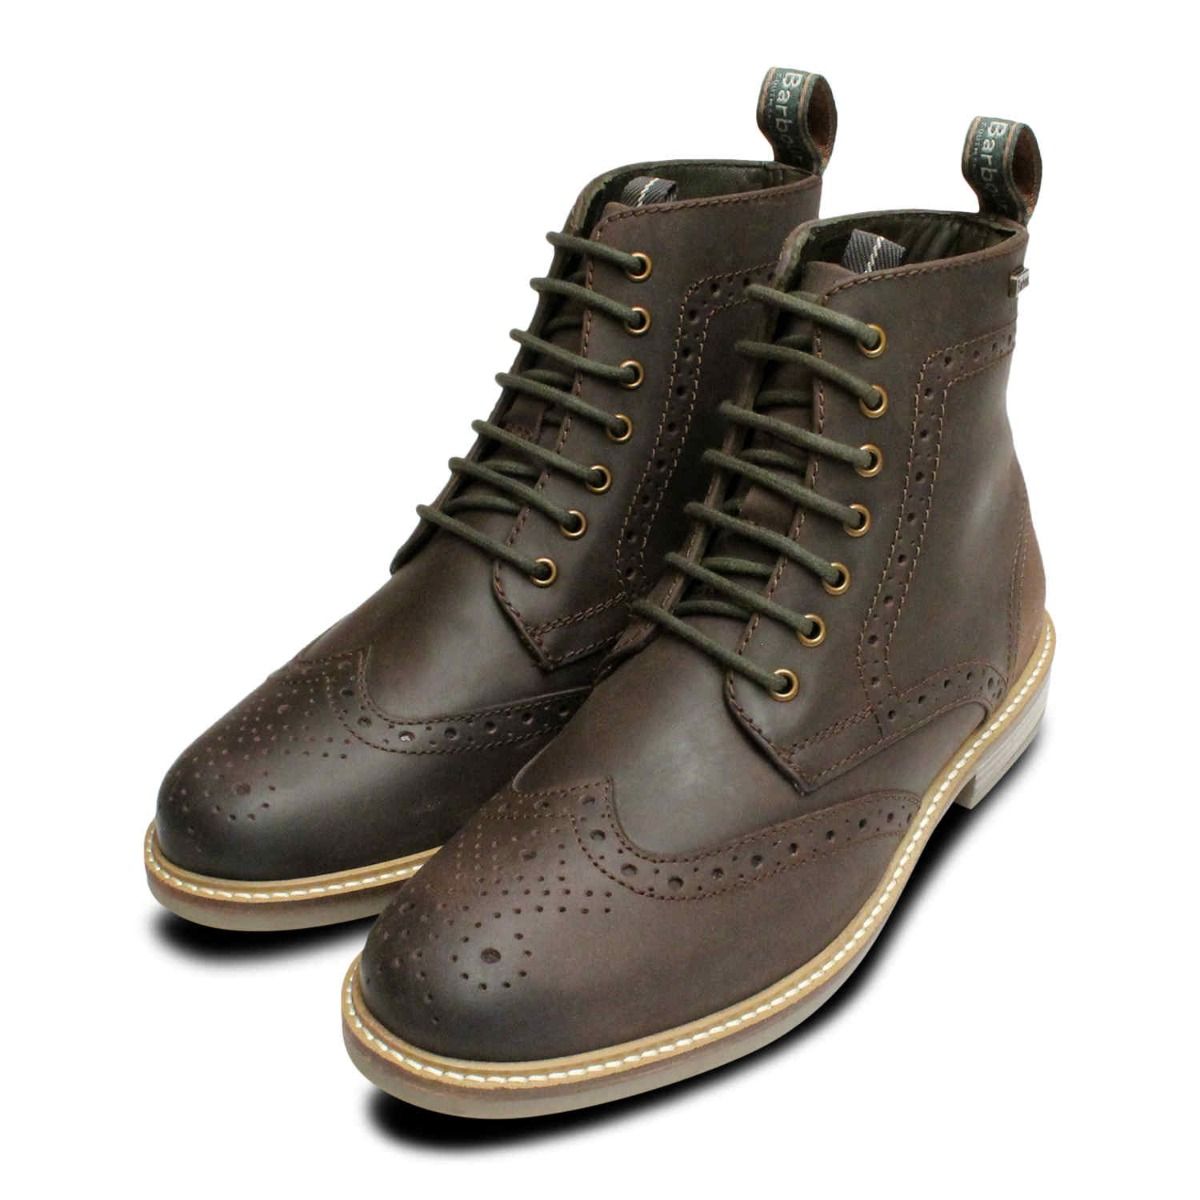 barbour belsay boots brown